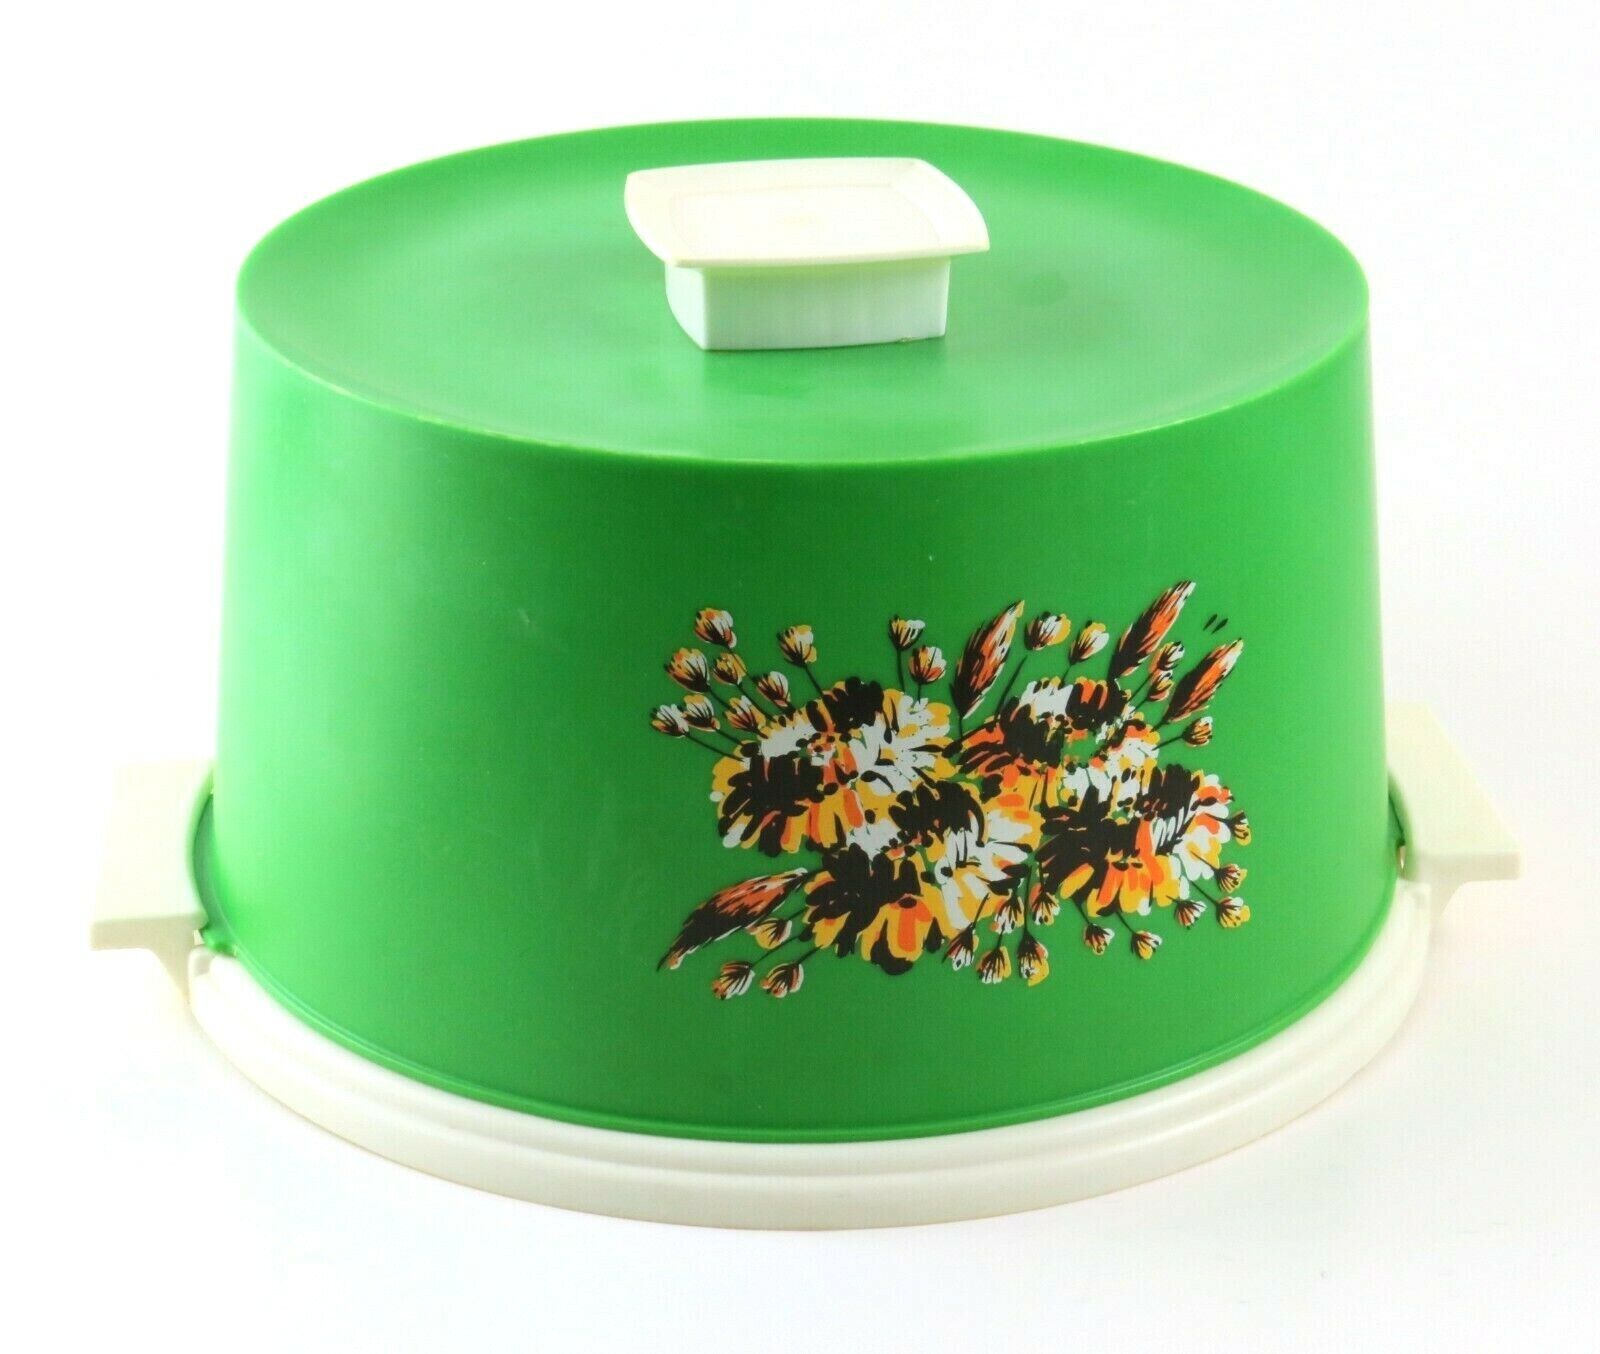 Awesome Vintage Cake Carrier/Storage, Green, White w/ Orange, Gold Floral Accent